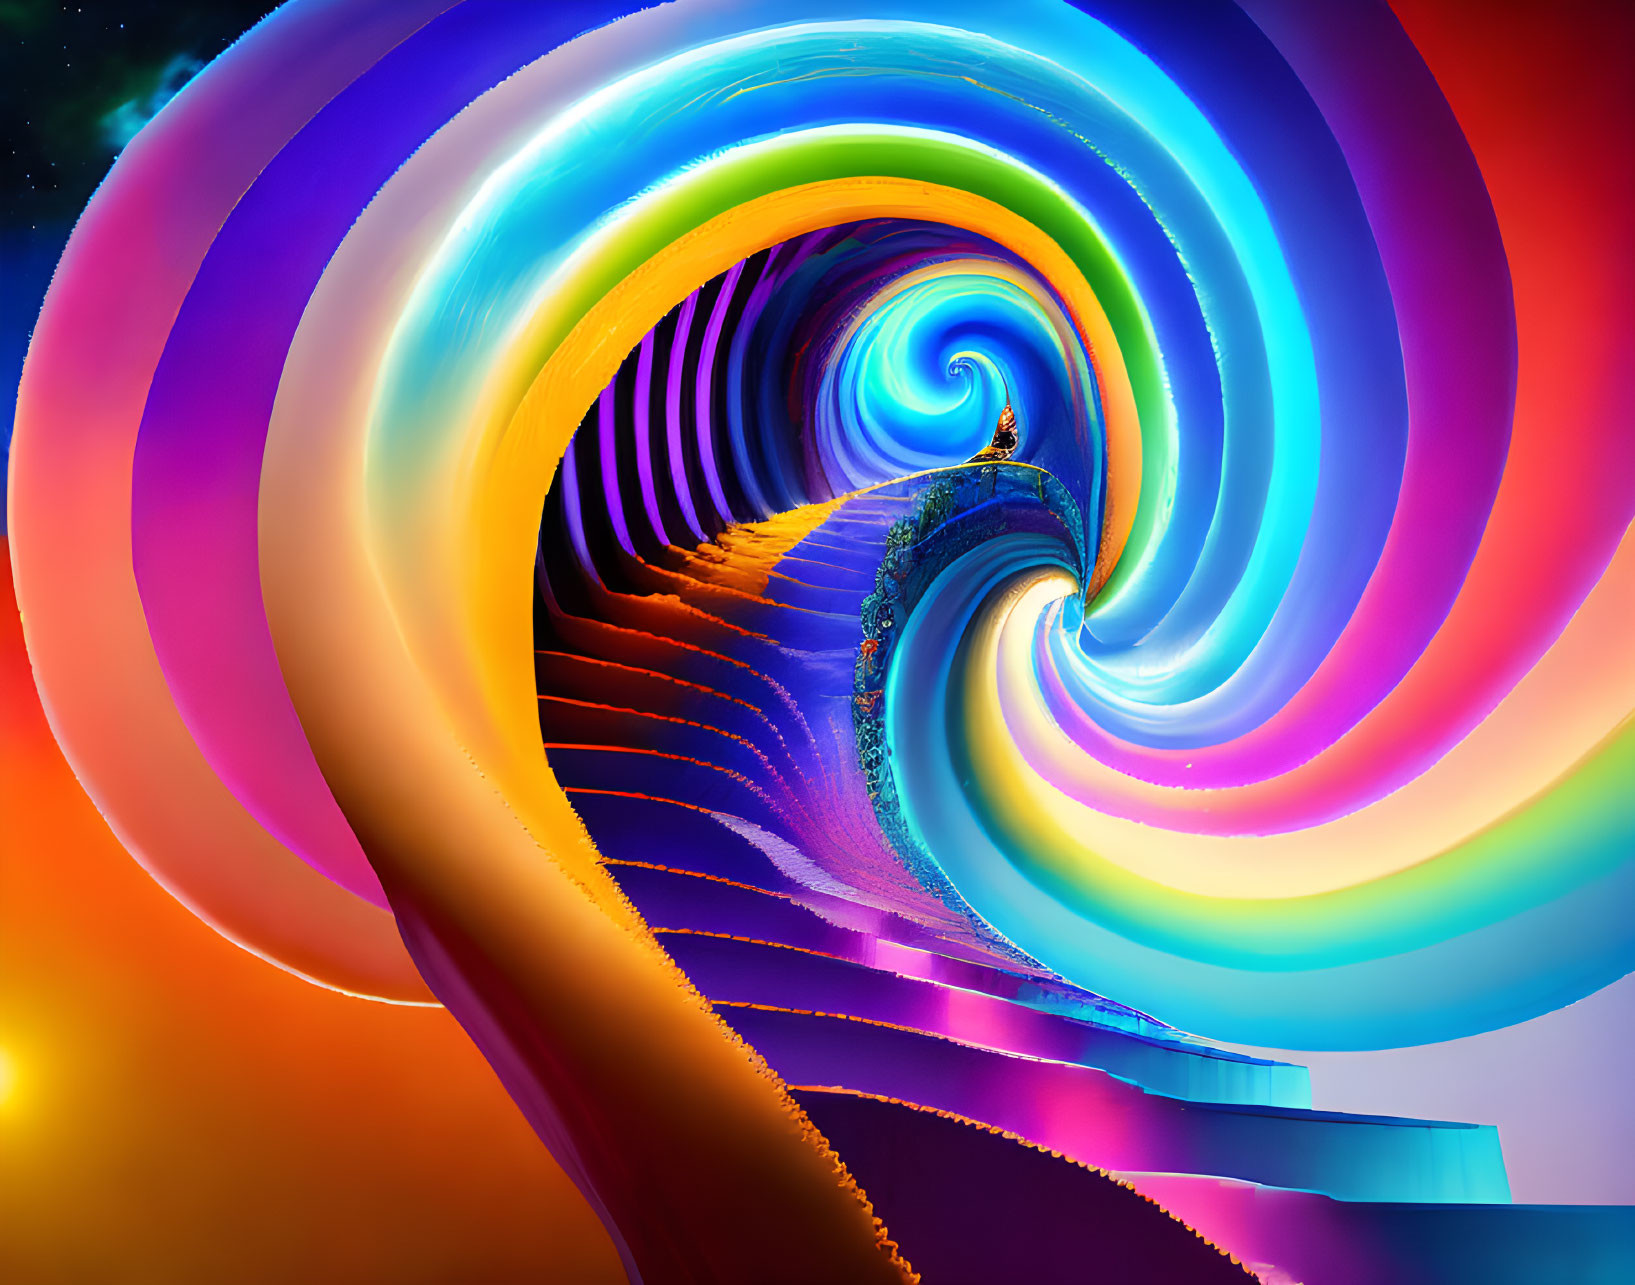 Colorful Rainbow Fractal Spiral on Starry Sky Background